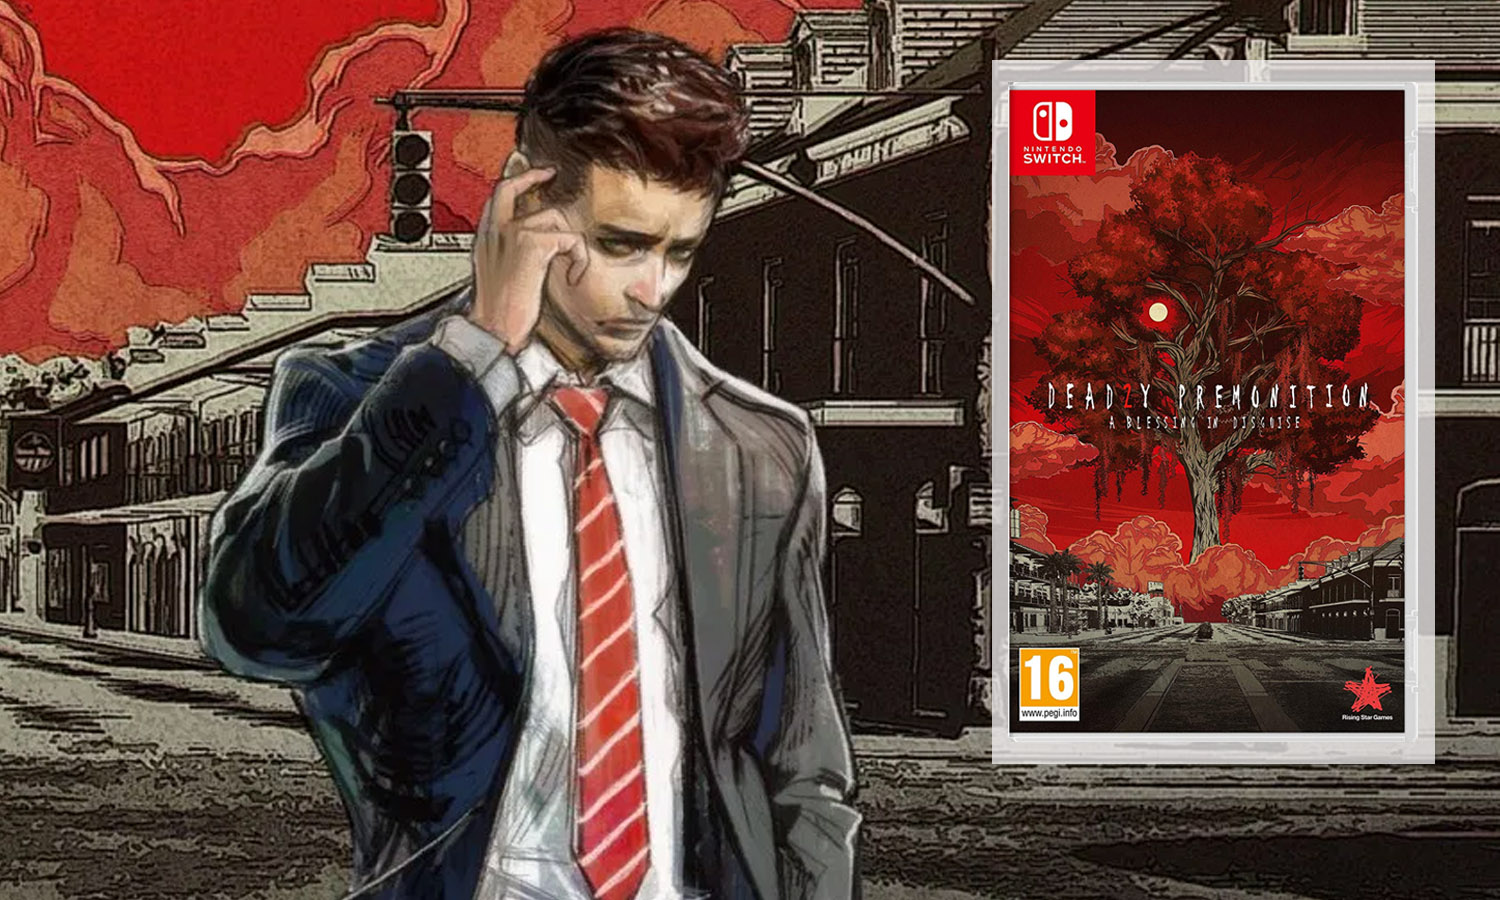 download switch deadly premonition 2 for free